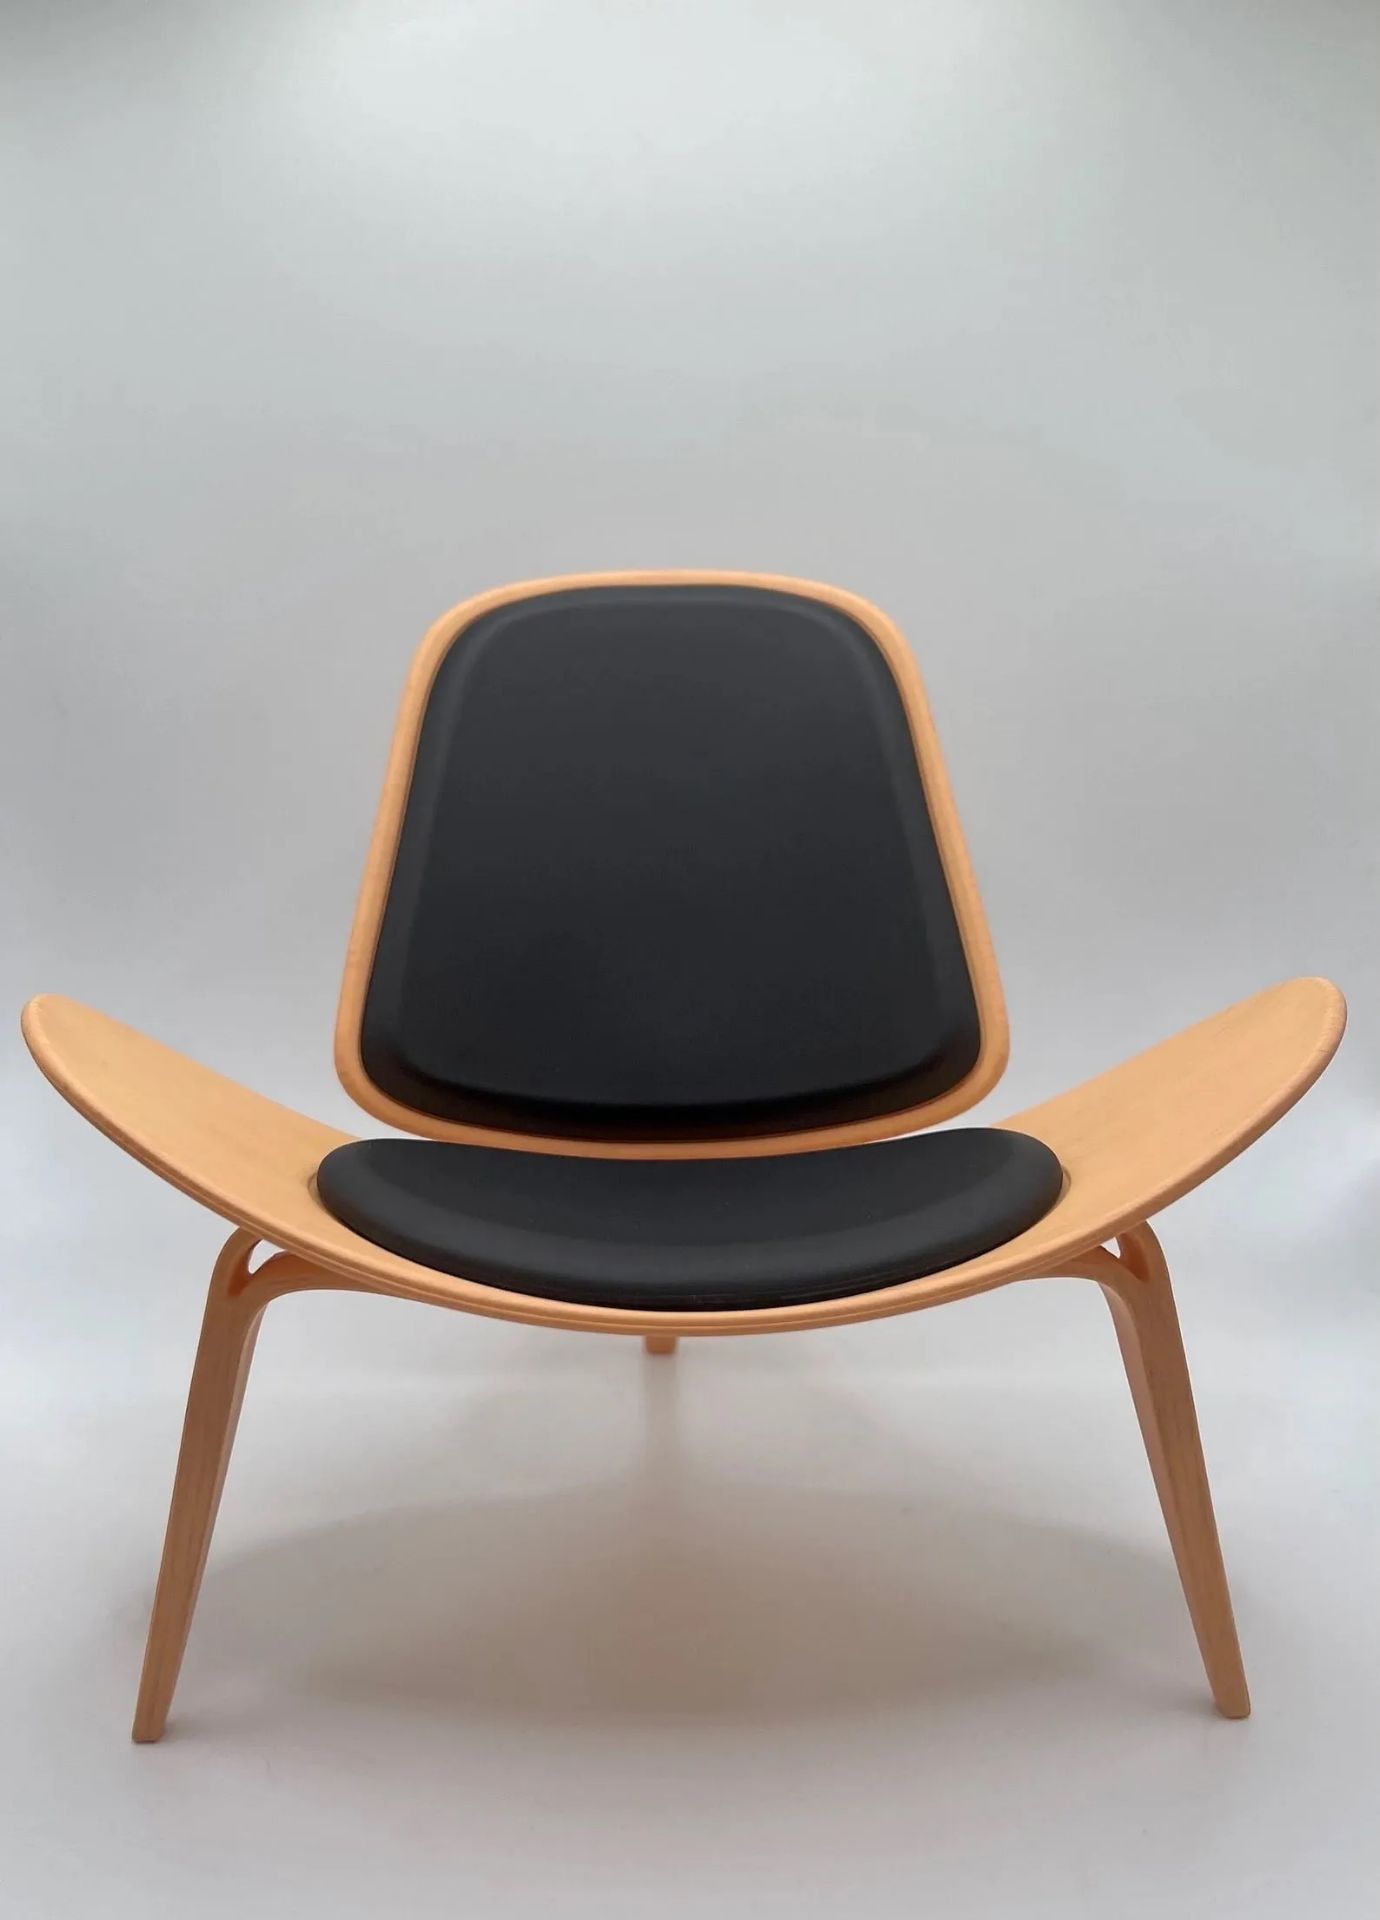 Three Hans Wegner Shell Chairs, Scale Model Desk Displays - Image 2 of 8